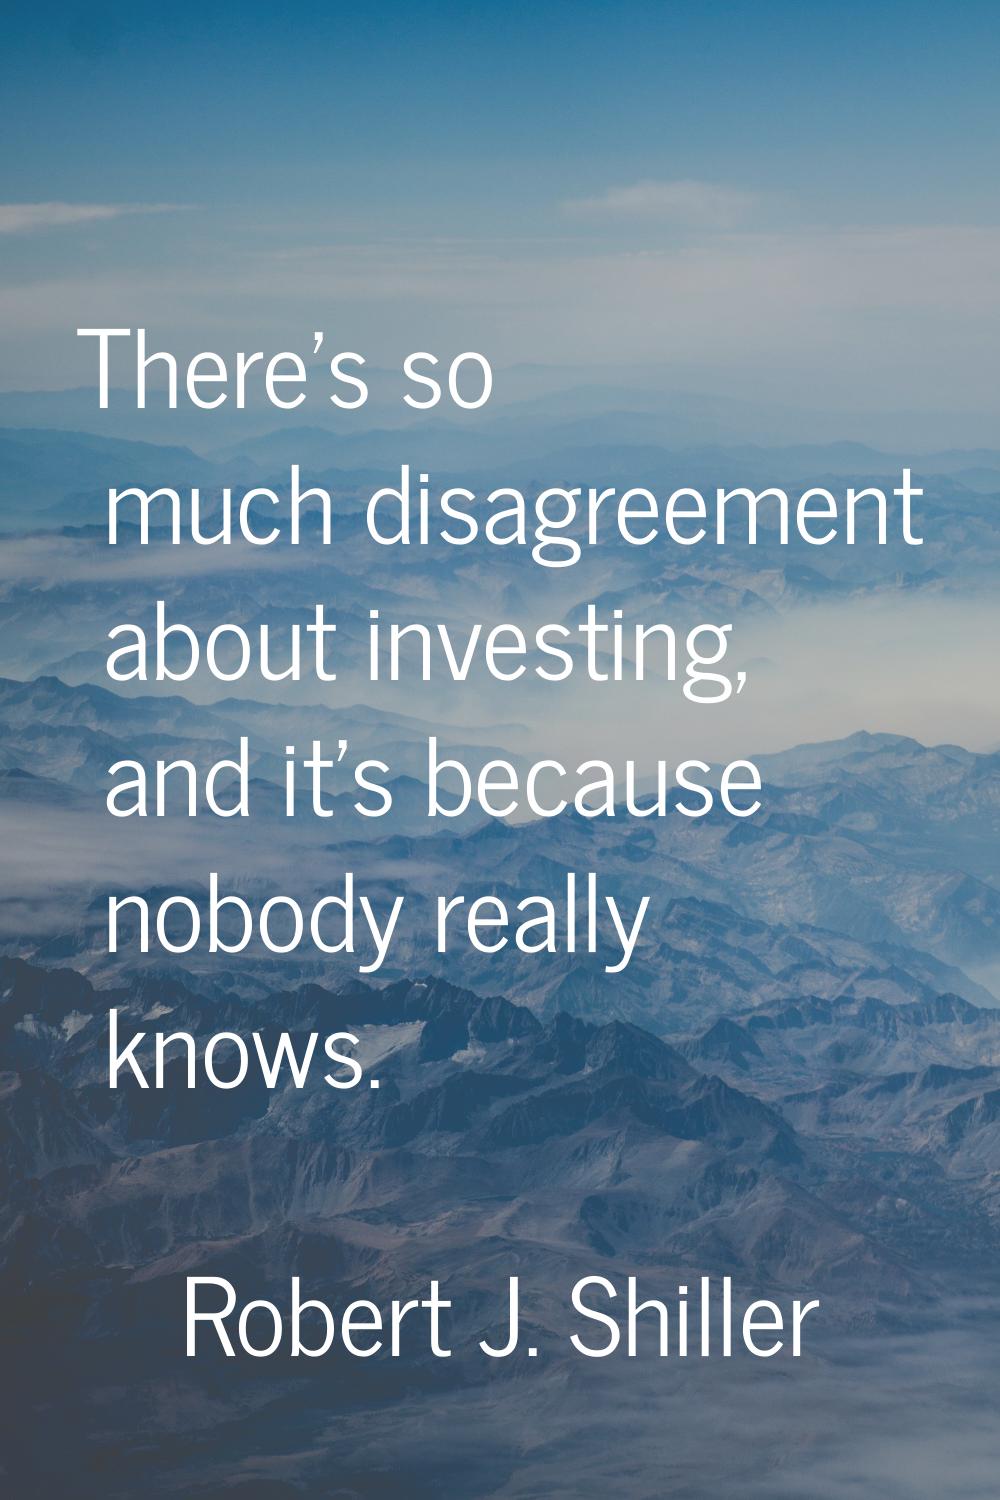 There's so much disagreement about investing, and it's because nobody really knows.